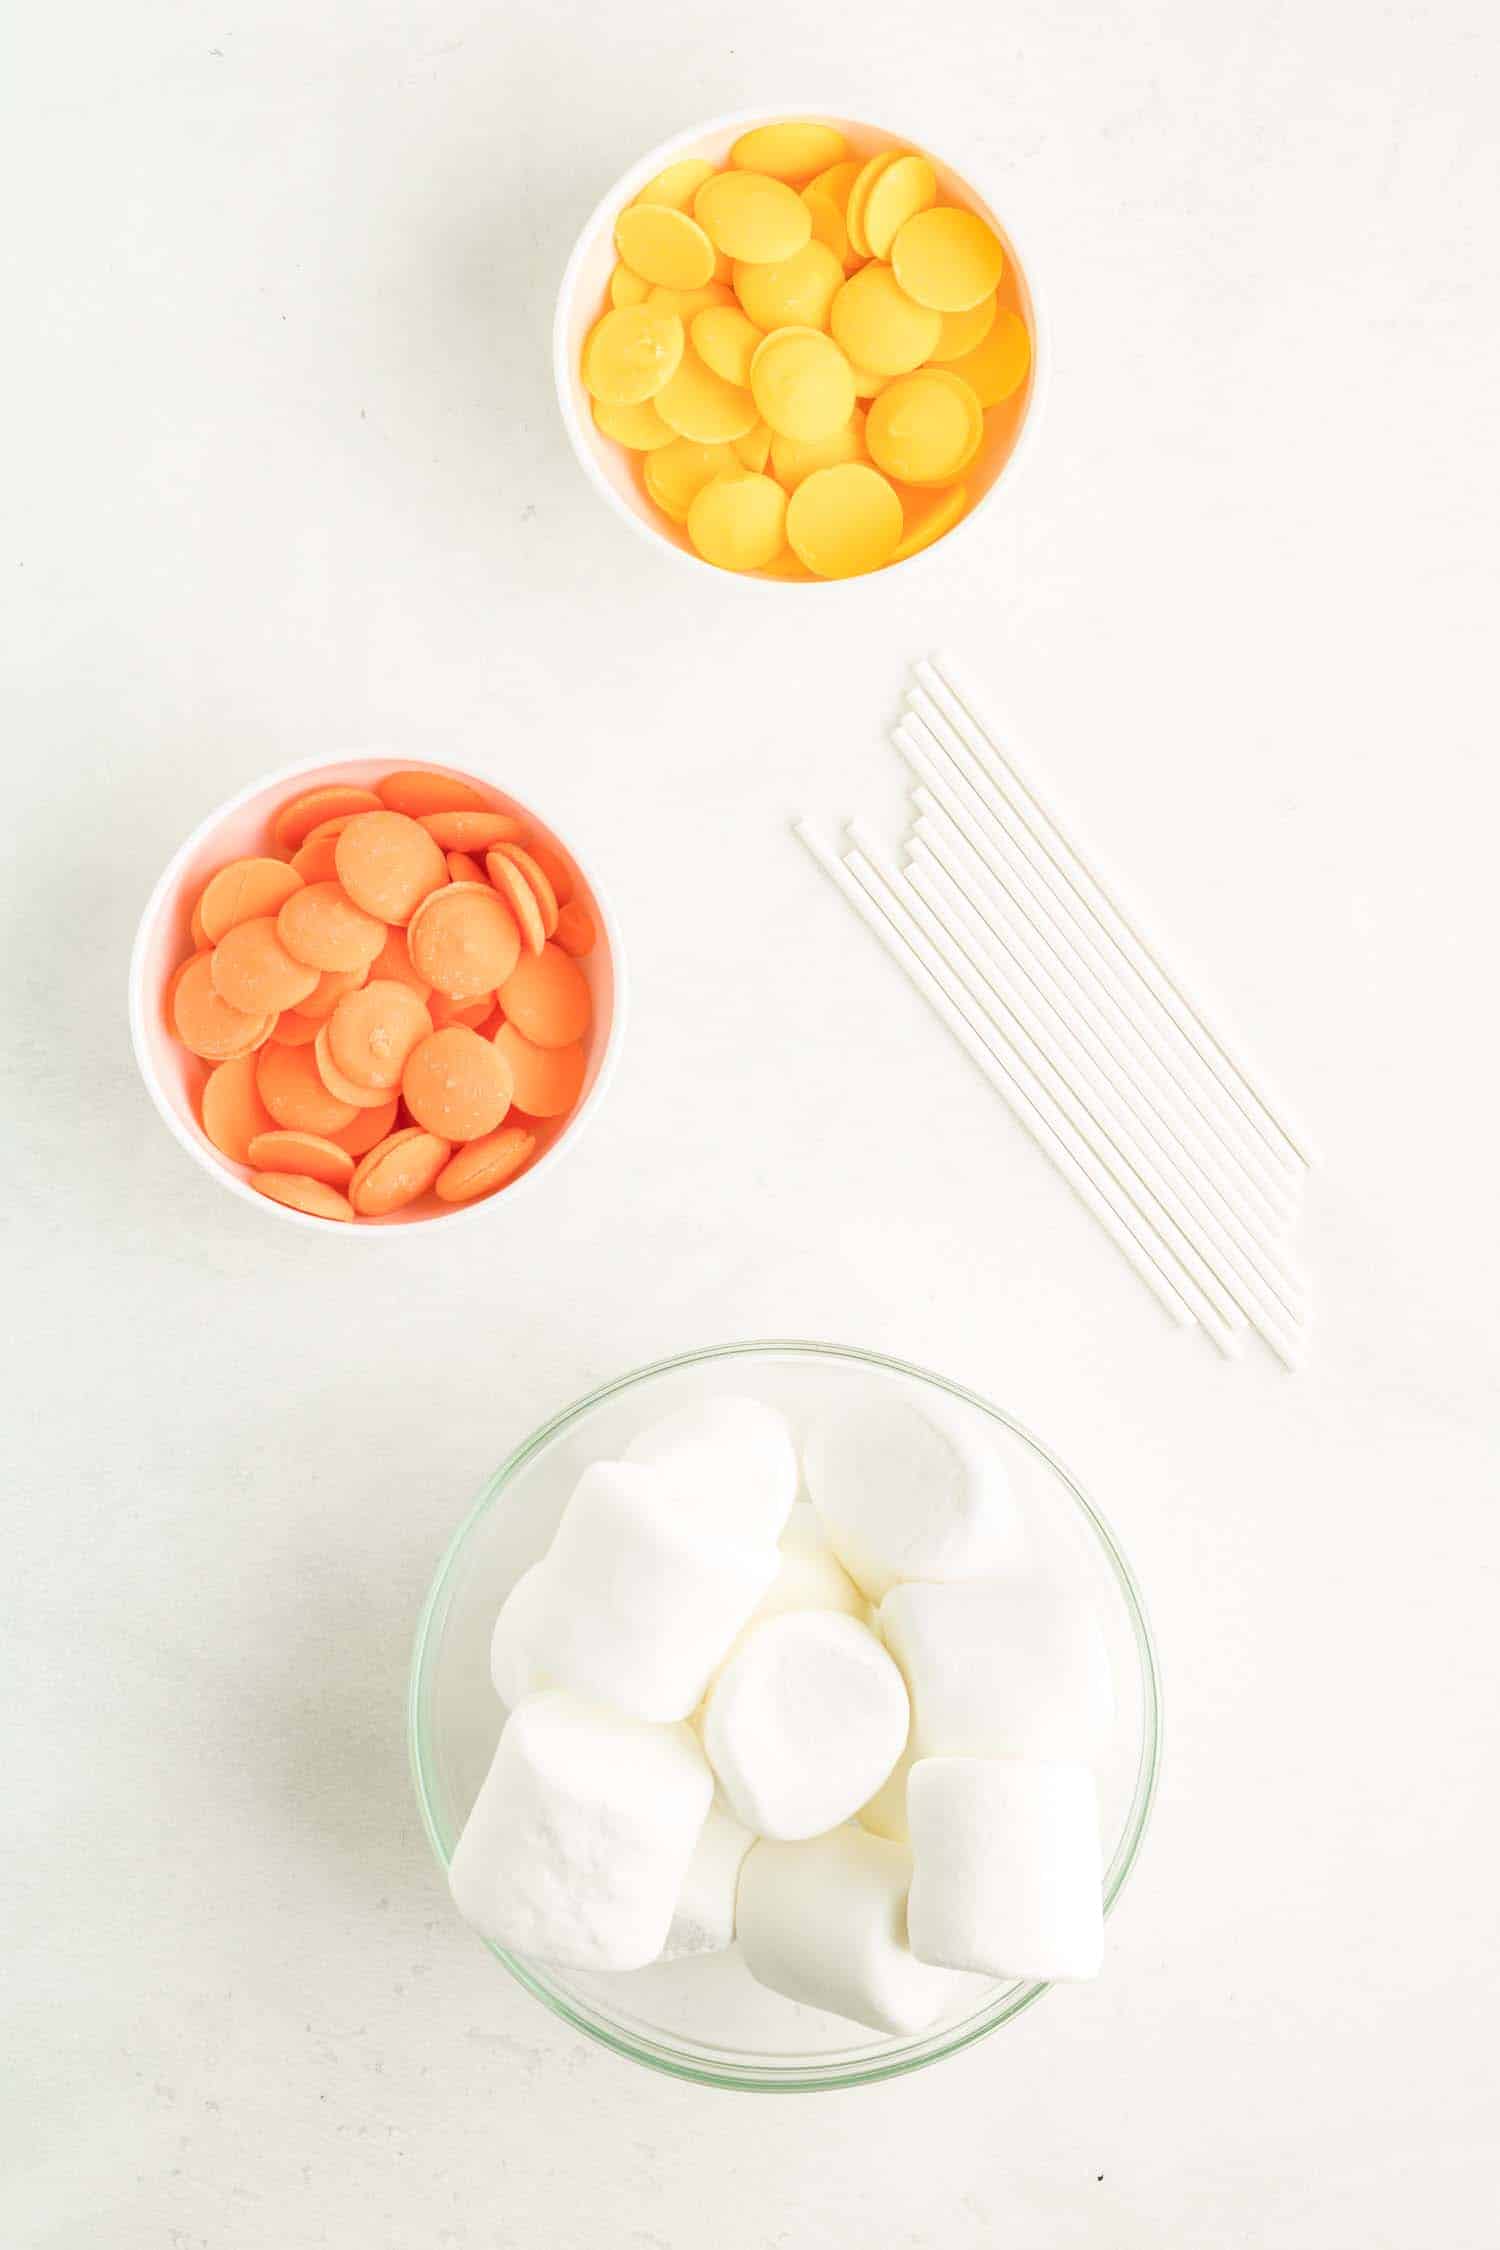 Ingredients in a glass bowl to make candy corn marshmallow pops.